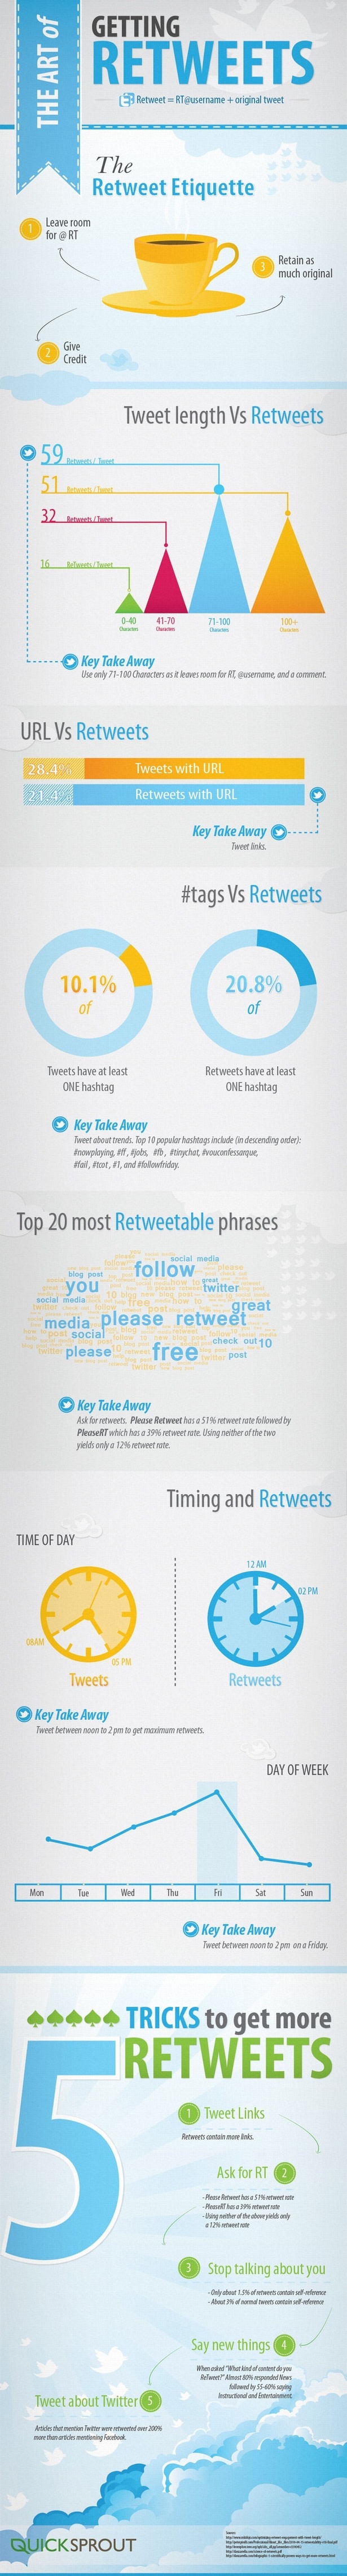 How to increase Retweets